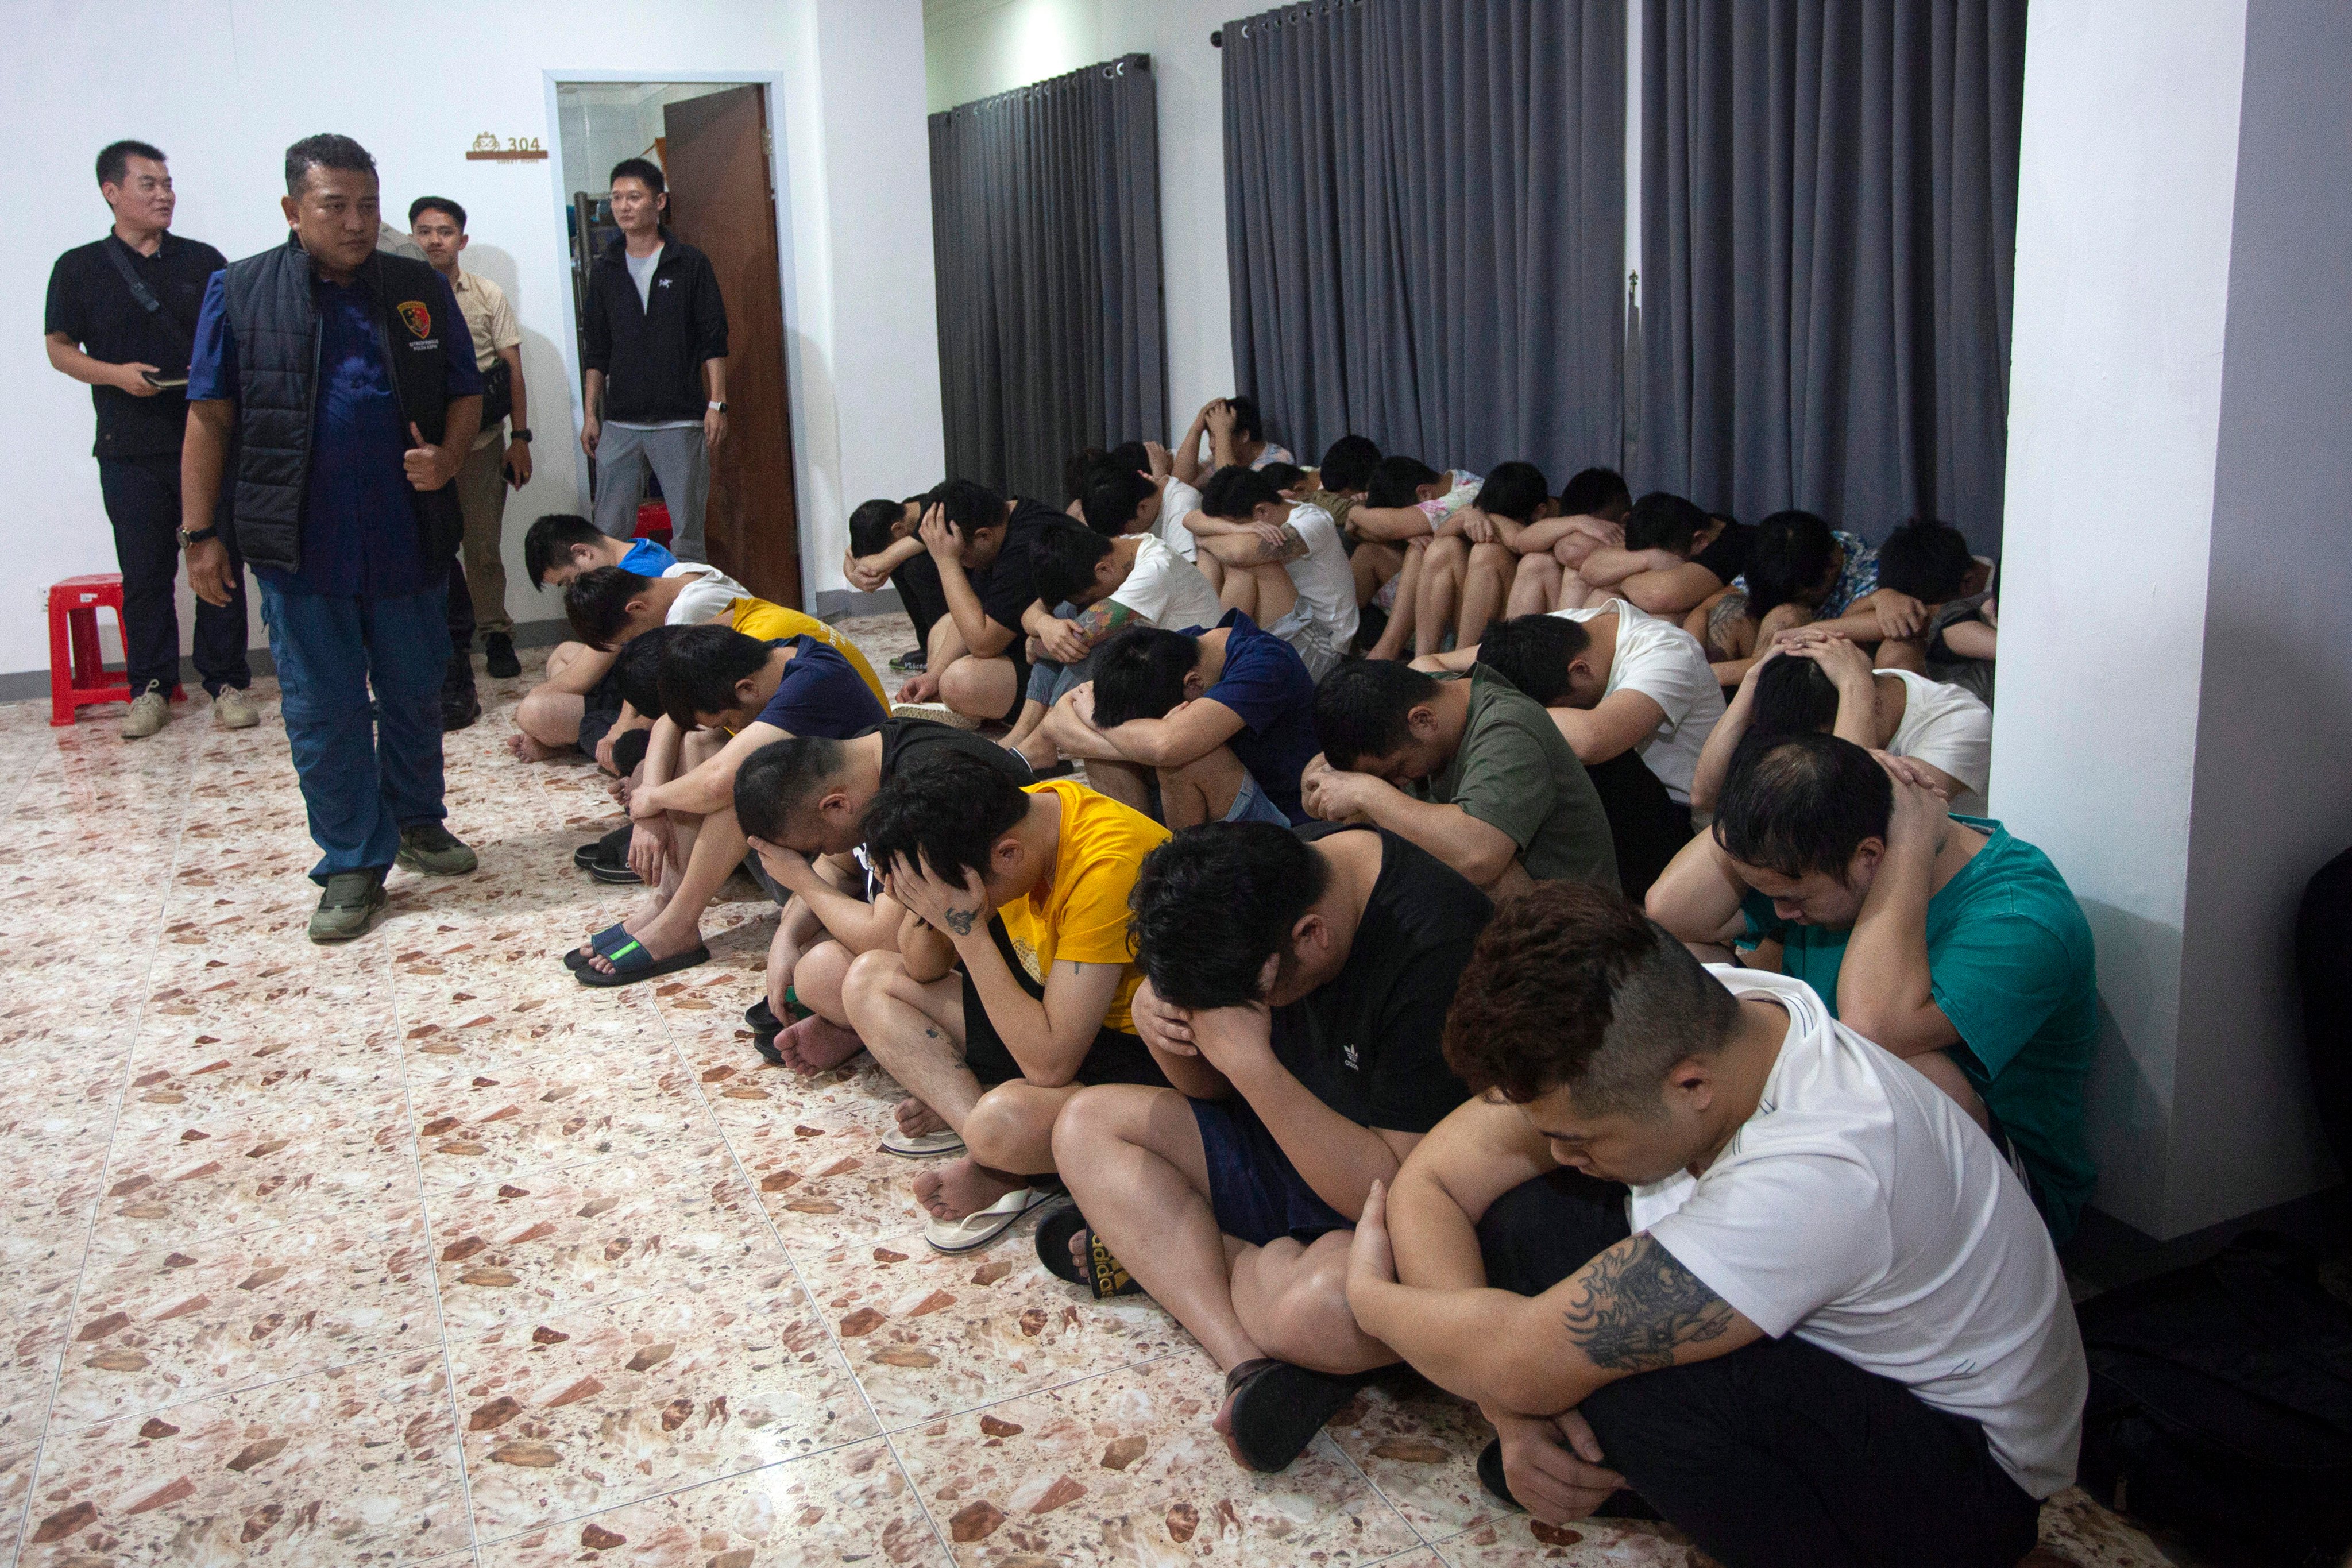 Chinese nationals are detained after a raid on a shophouse in Batam on August 29. Photo: AP